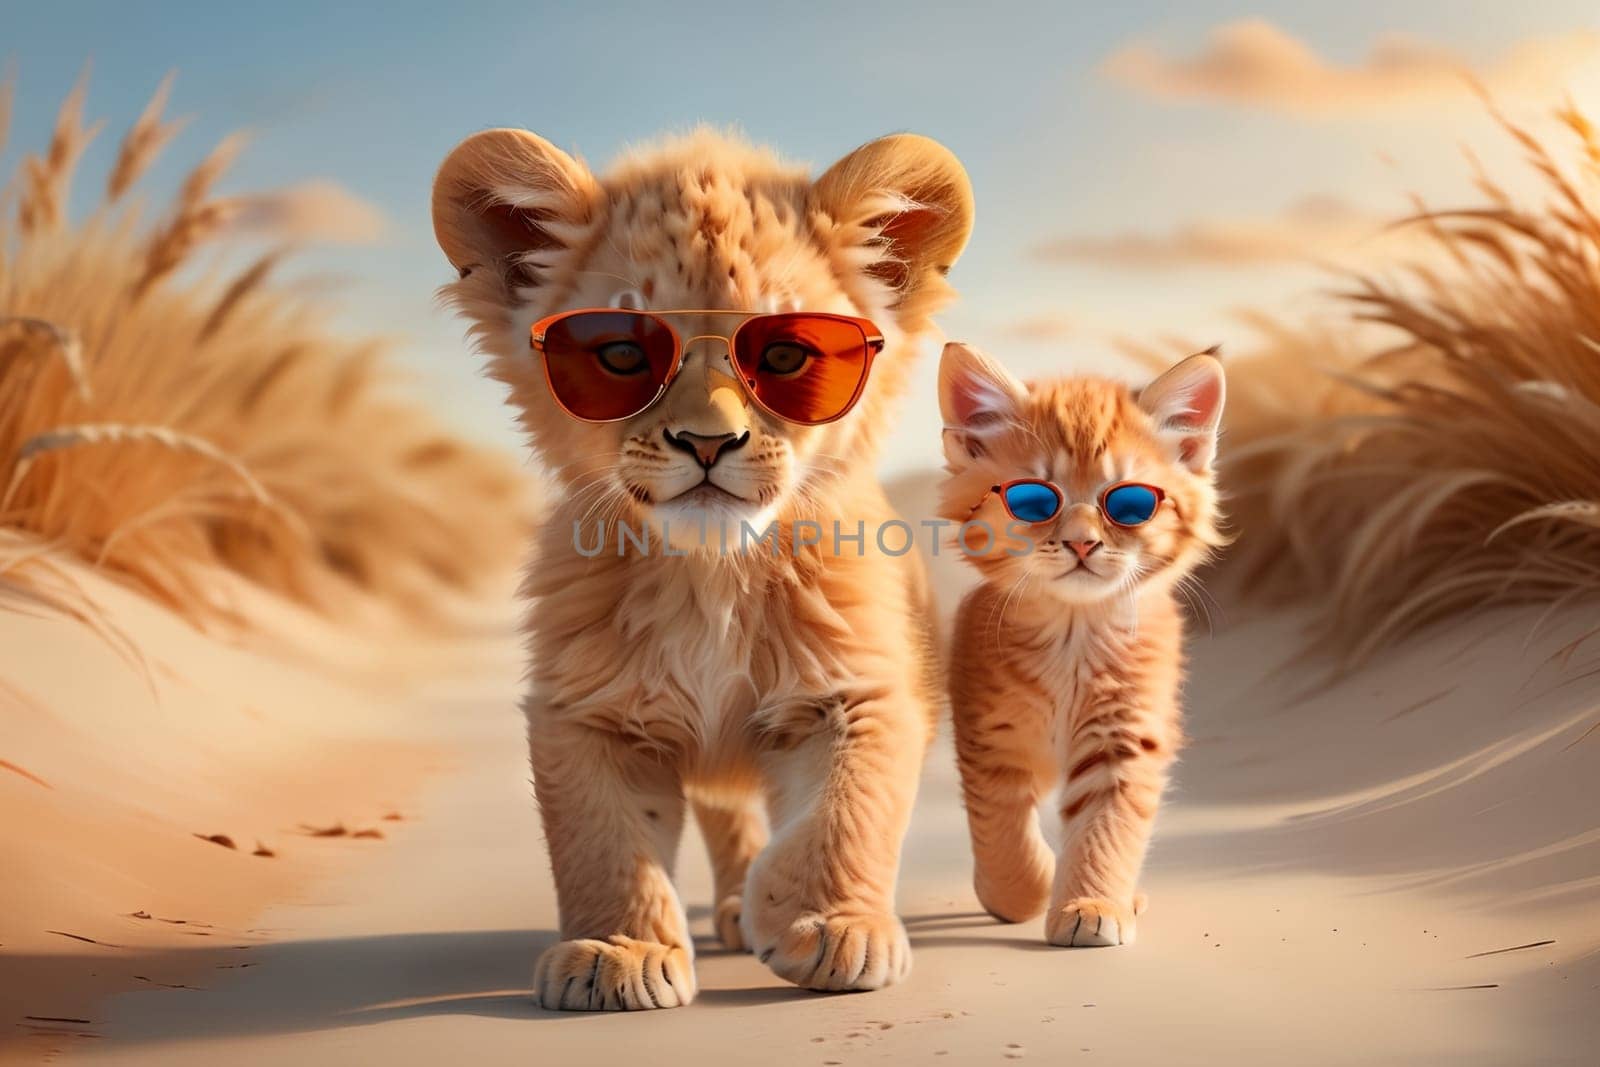 cute red tiger cub and kitten, walking along the road in the desert by Rawlik